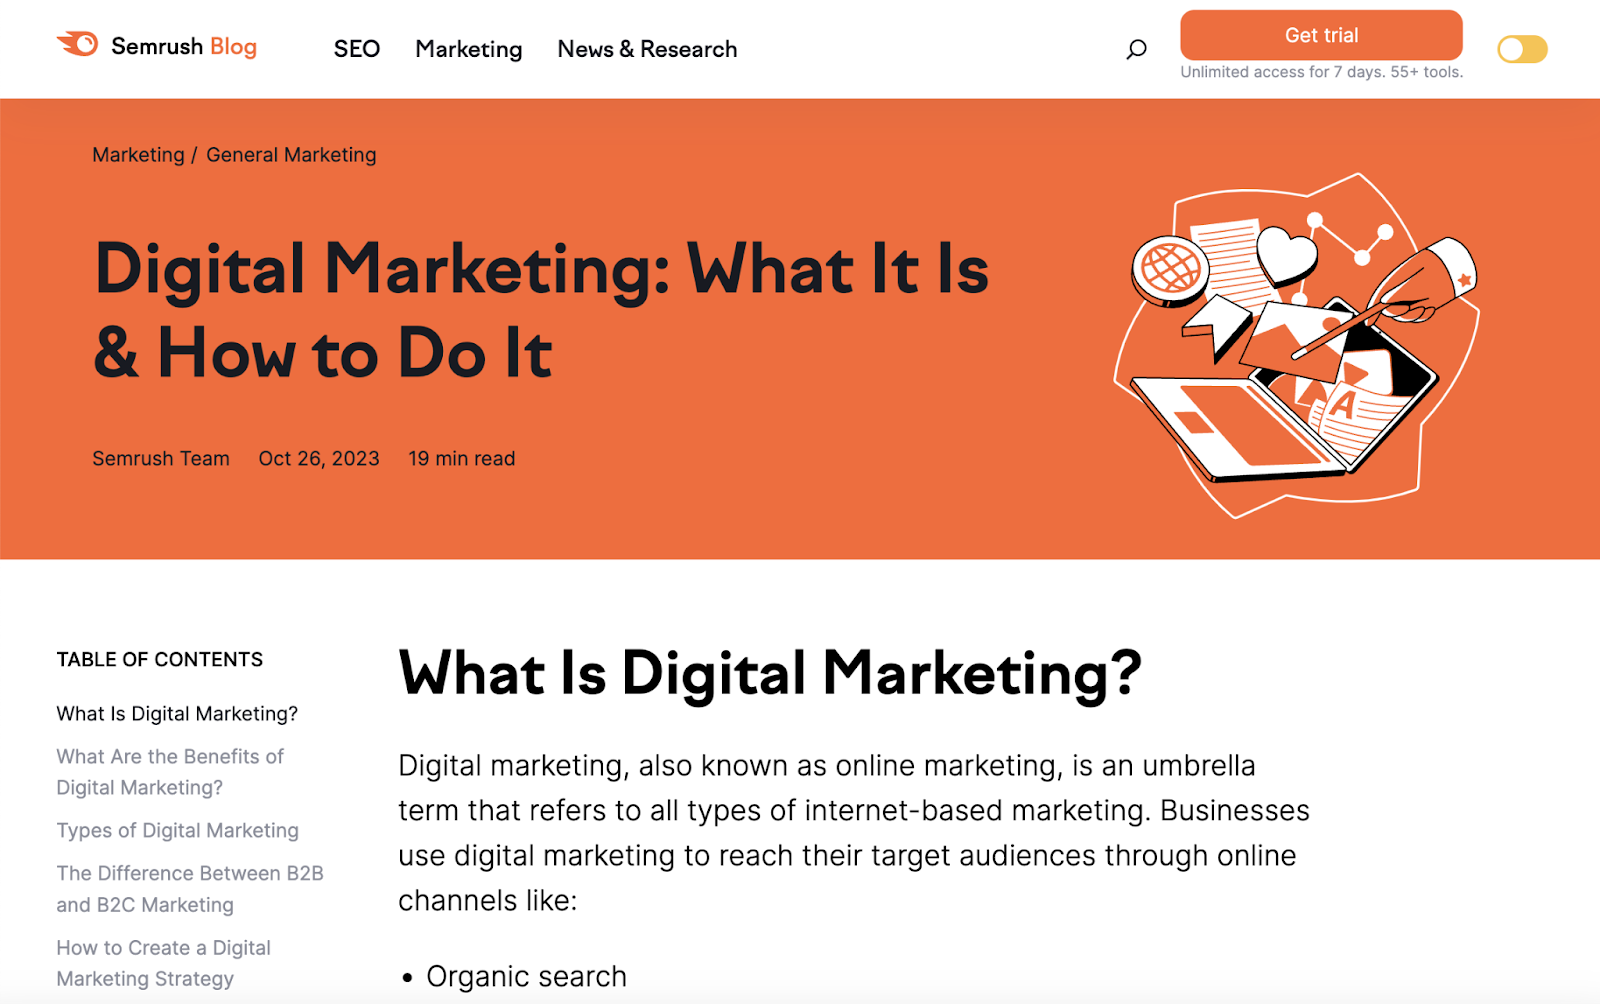 Semrush blog post titled Digital Marketing: what it is and how to do it